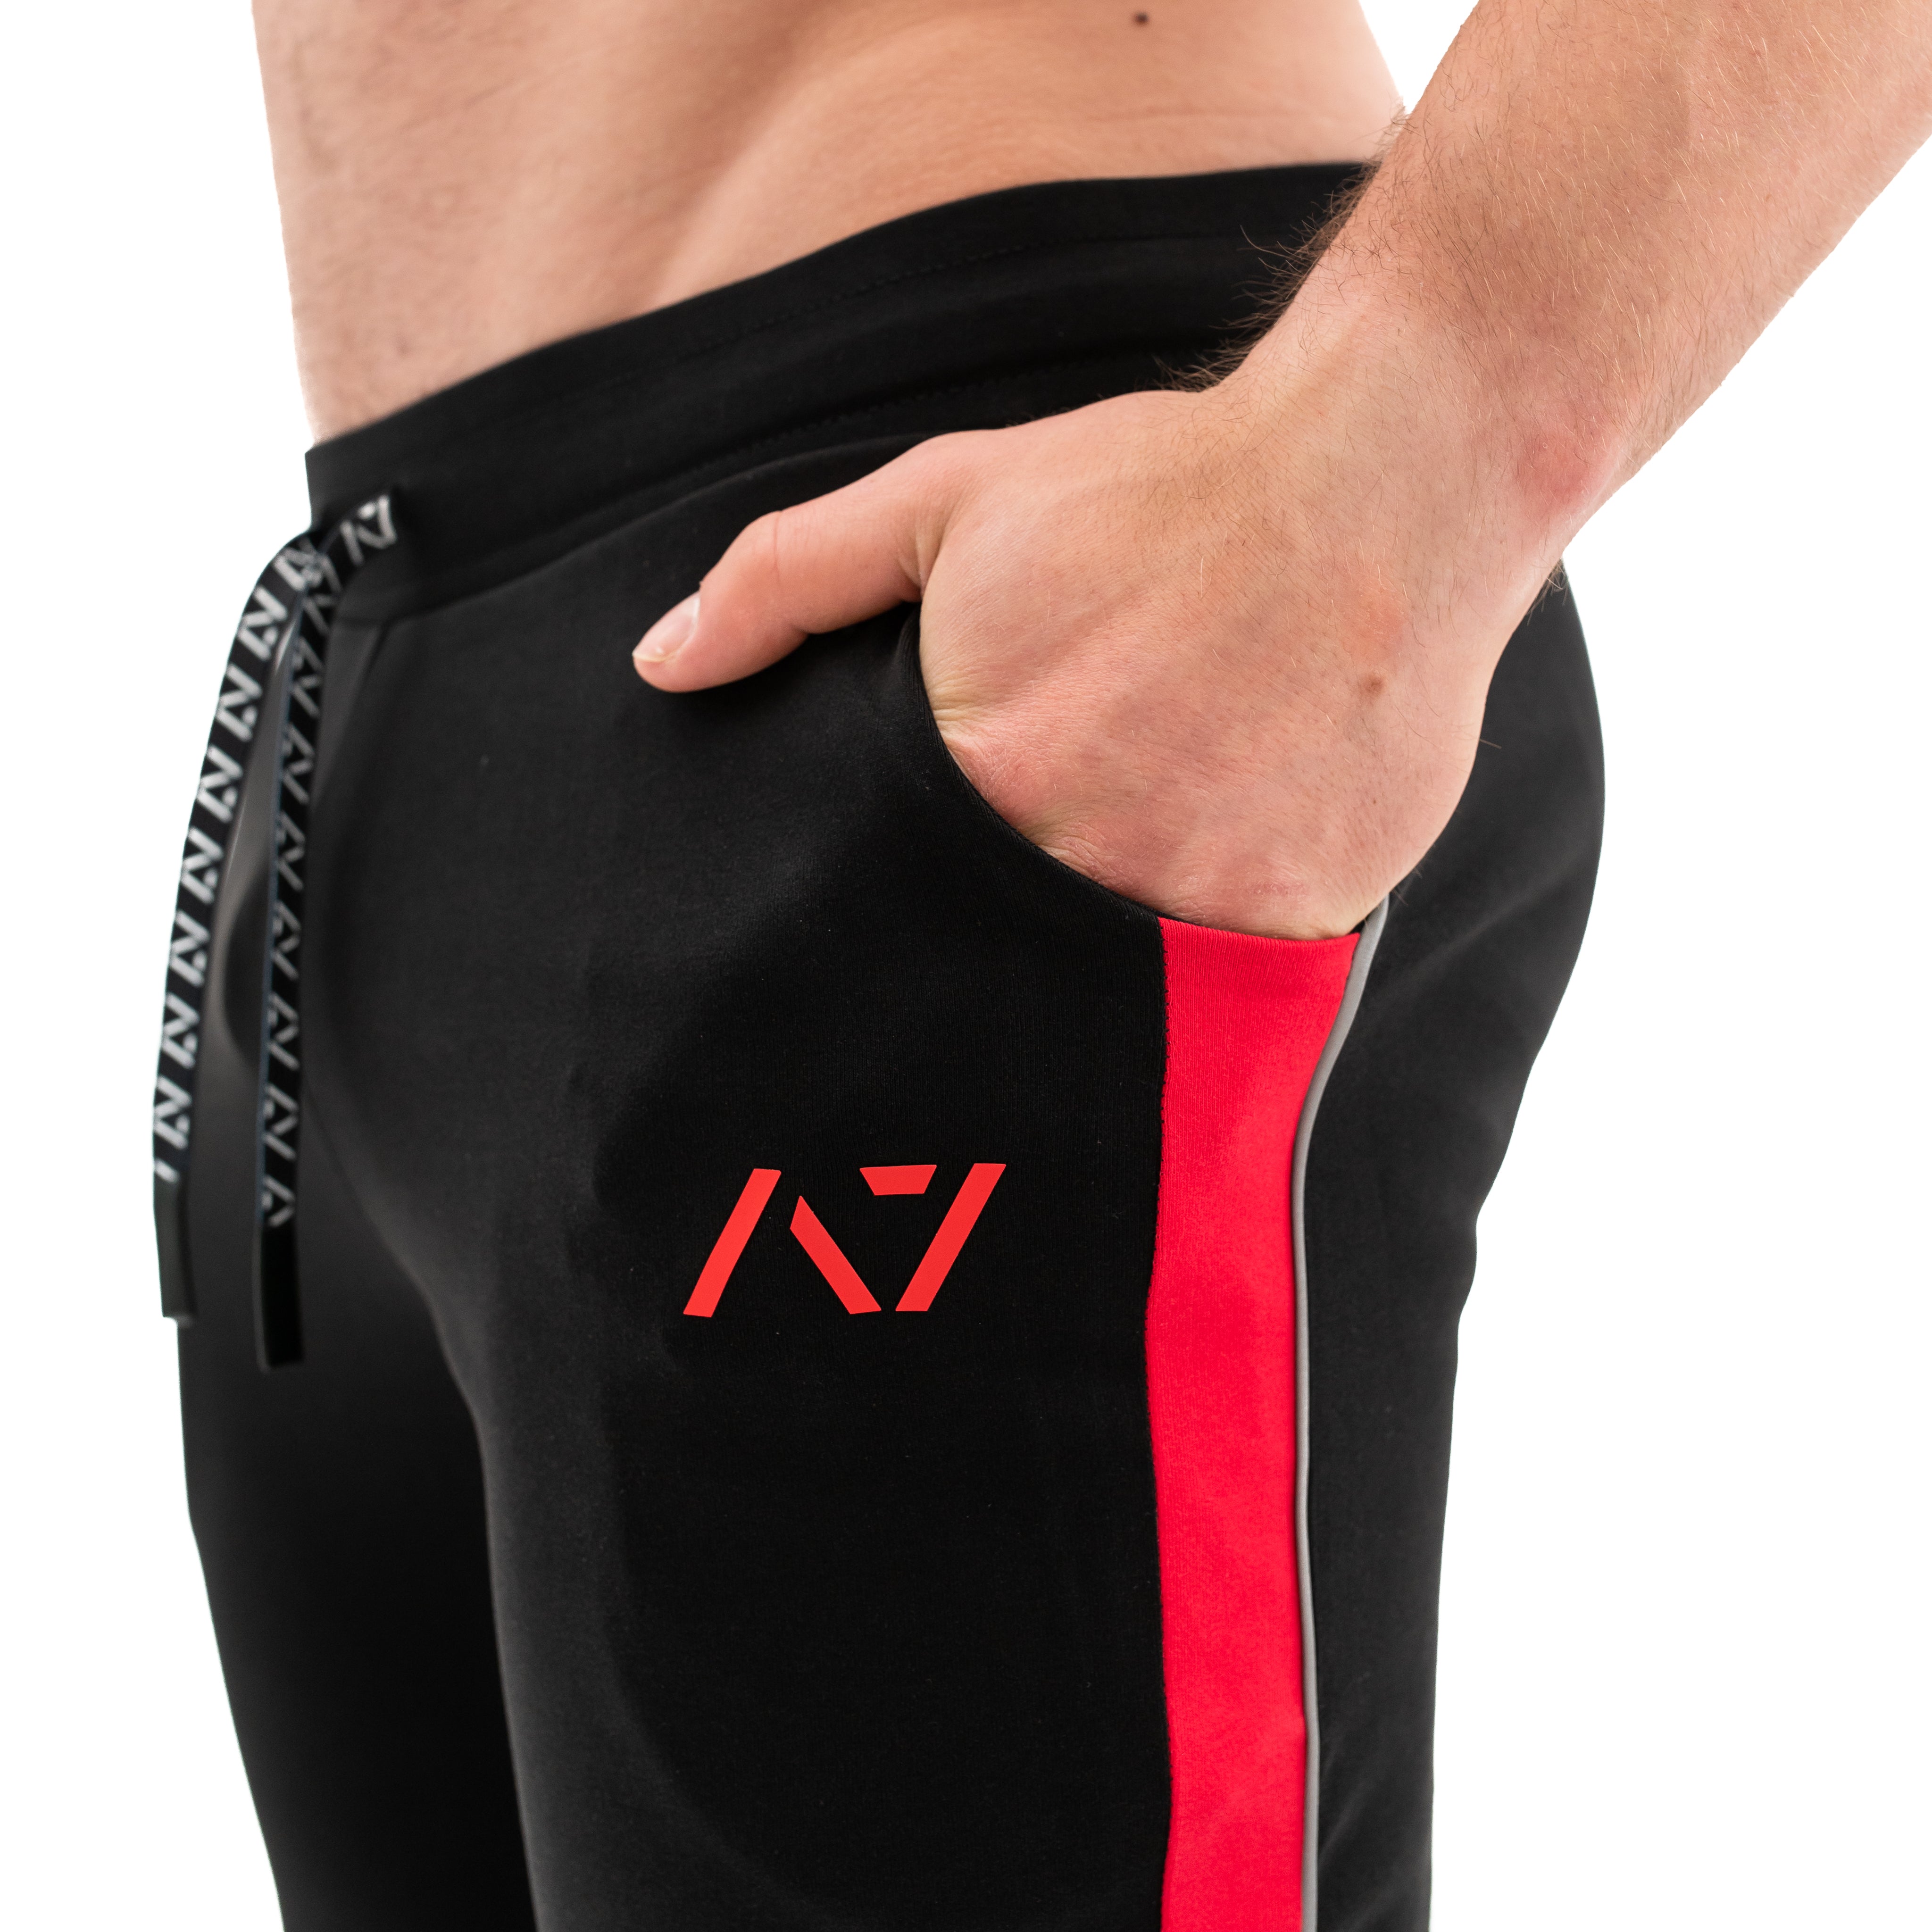 Our Moxie Joggers are made with premium cotton spandex fabric to keep you comfy throughout the day whether you are training or going out! Our Moxie Joggers contour to your body and feature a reflective stripe on both side, deep un-zippered pockets and stealth matte logos. Now in our new Inferno colourway. You can purchase Military Moxie joggers from A7 UK or A7 Europe. A7 UK shipping to UK, Ireland, France, Italy, Germany, the Netherlands, Sweden and Poland.